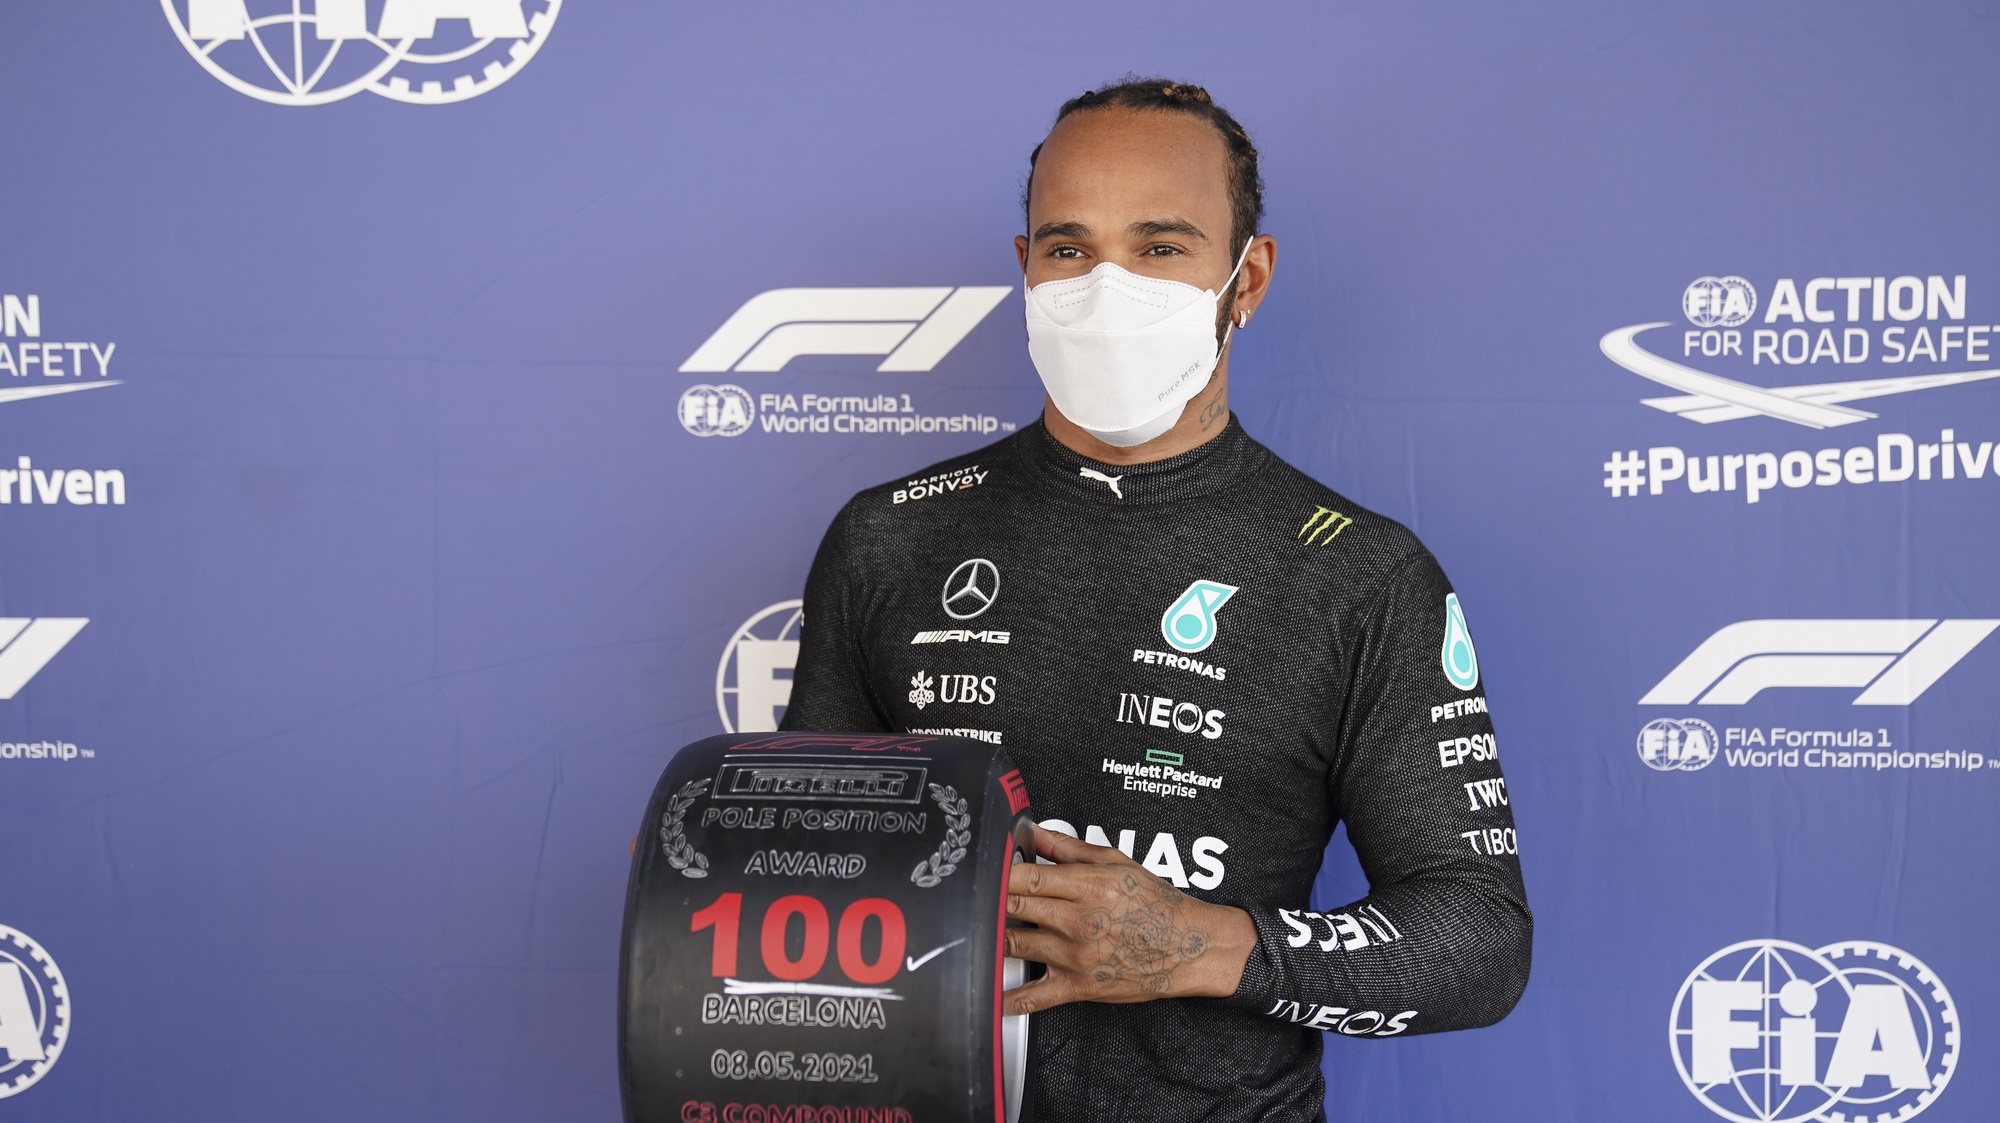 epa09185356 British Formula One driver Lewis Hamilton of Mercedes-AMG Petronas reacts after the qualifying for the Formula One Grand Prix of Spain at the Circuit de Barcelona-Catalunya in Montmelo, Spain 08 May 2021.  EPA/Gabriel Bouys / POOL